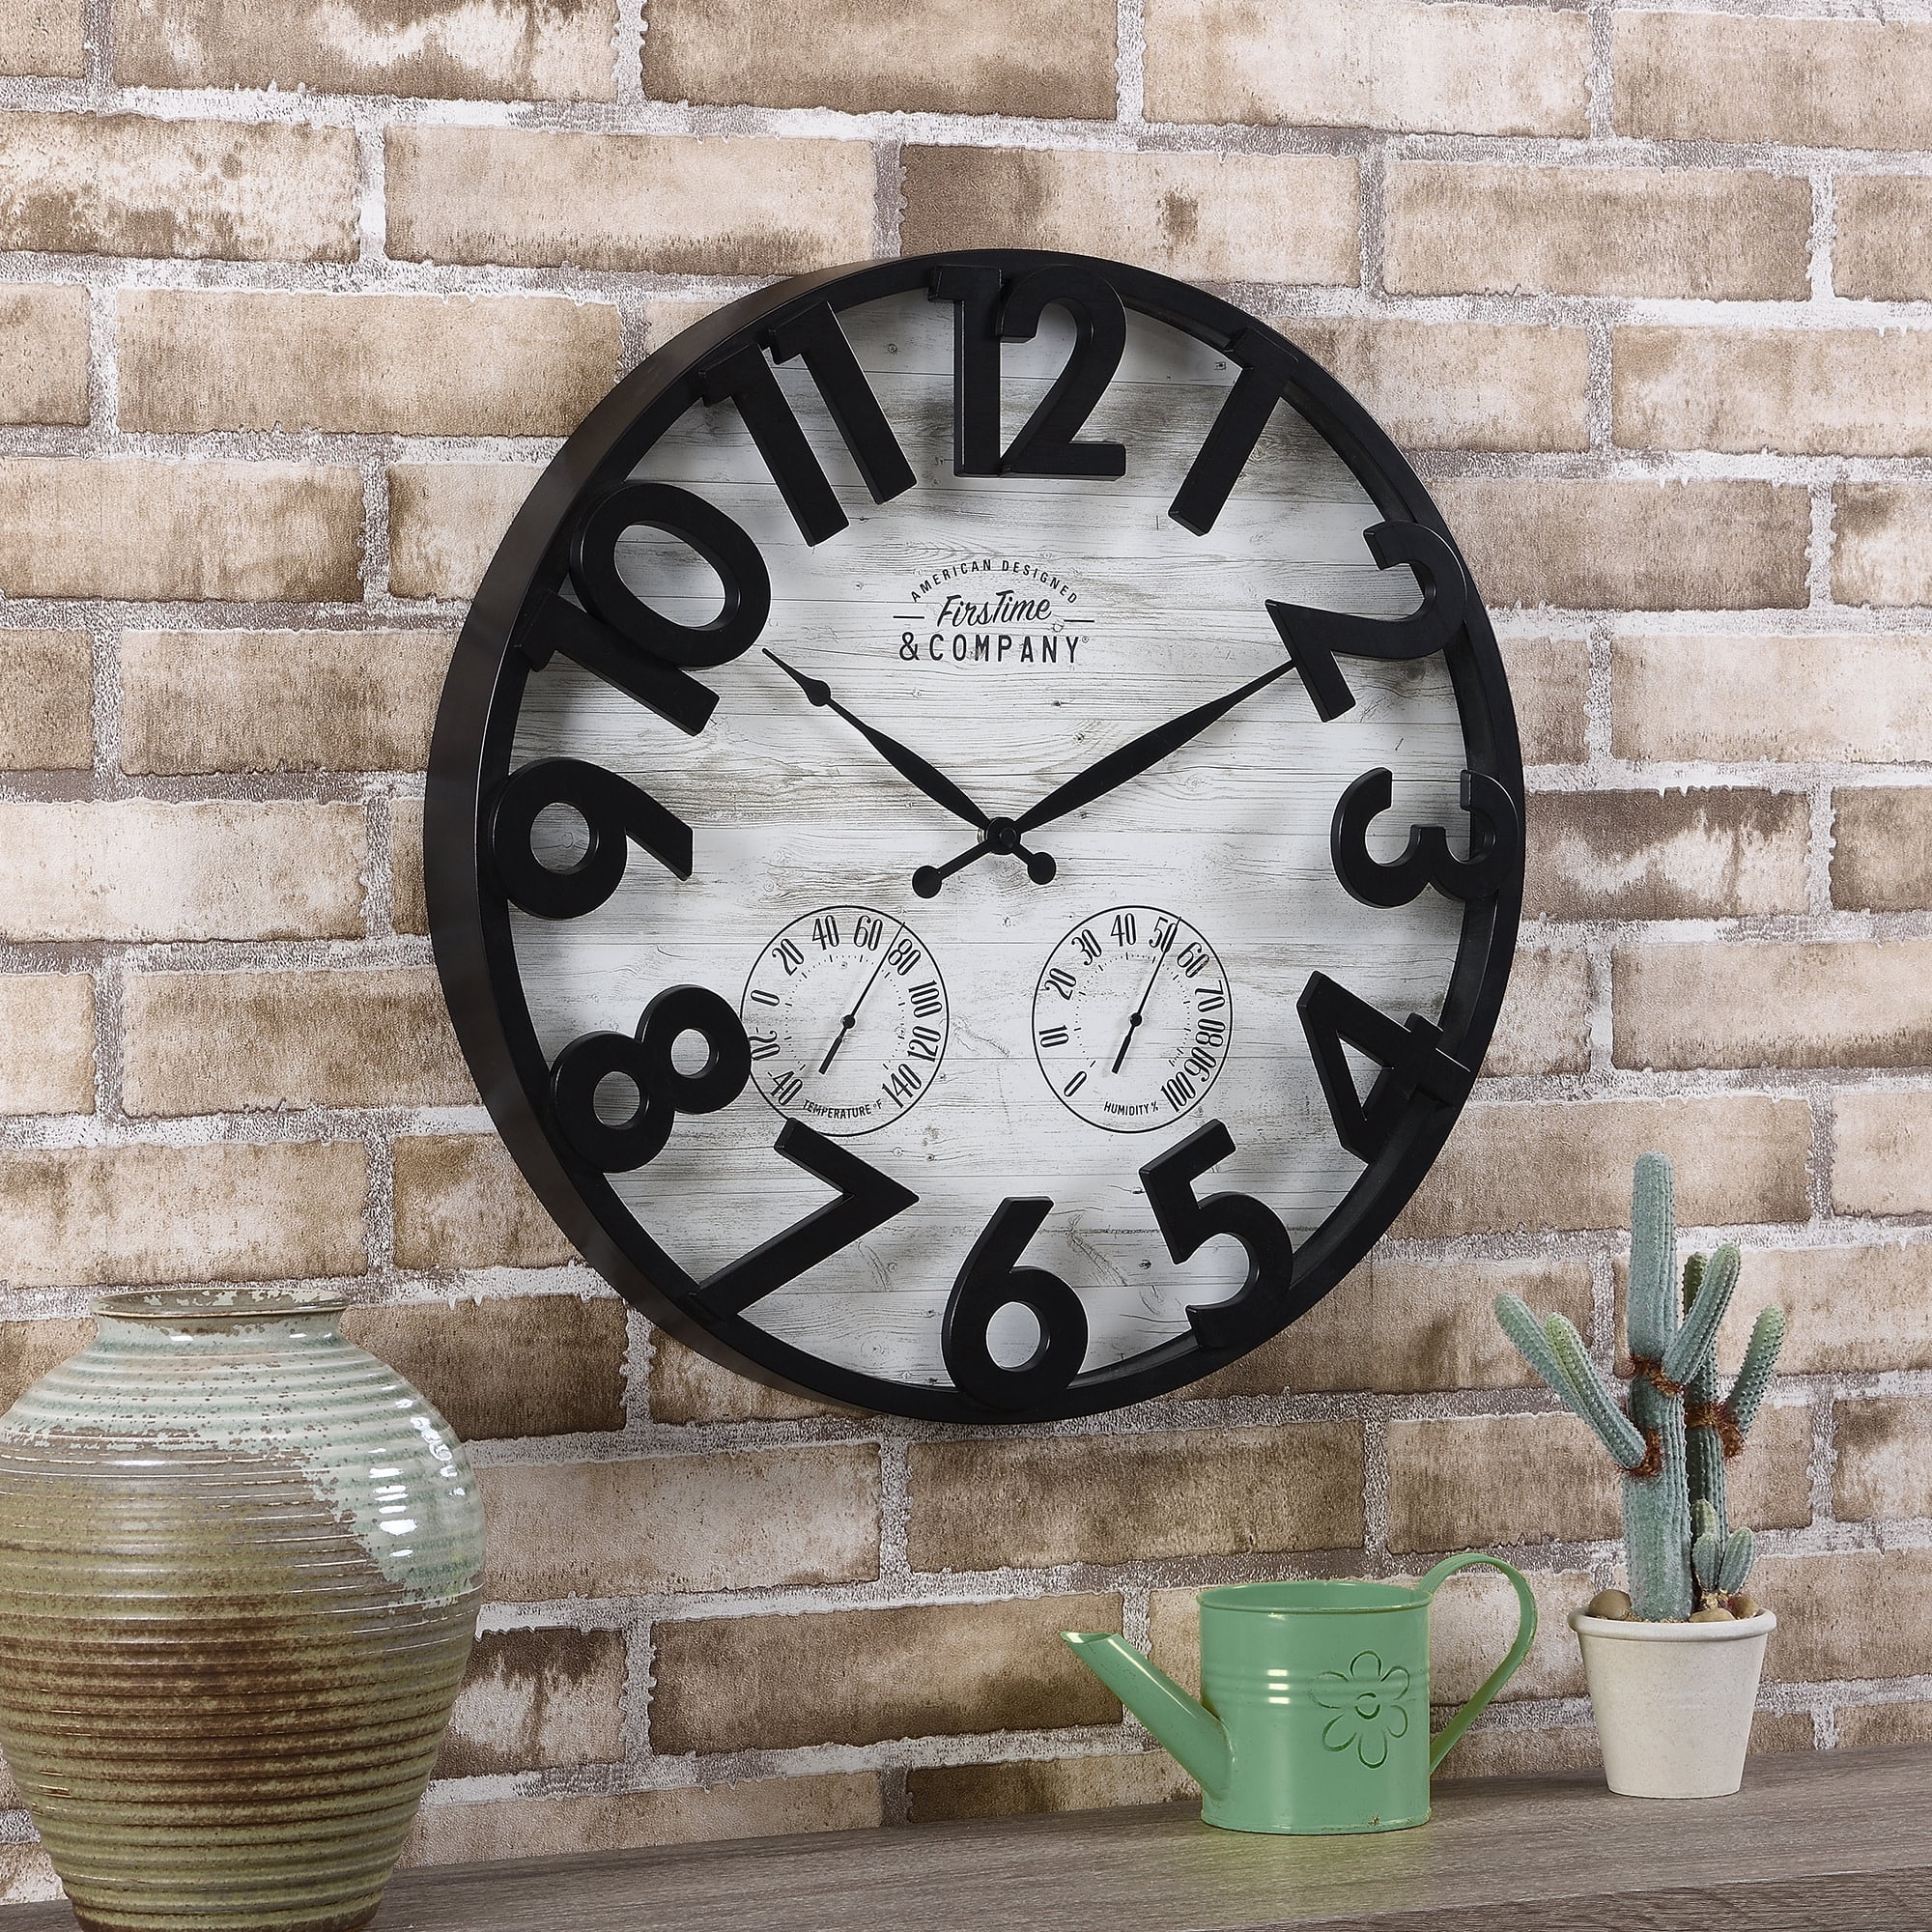 Presentime & Co 18 Farmhouse Outdoor Luminous Clock with Weather  Thermometer & Hygrometer, Weather Station, Night Light with Smart Sensor -  Grey Oak